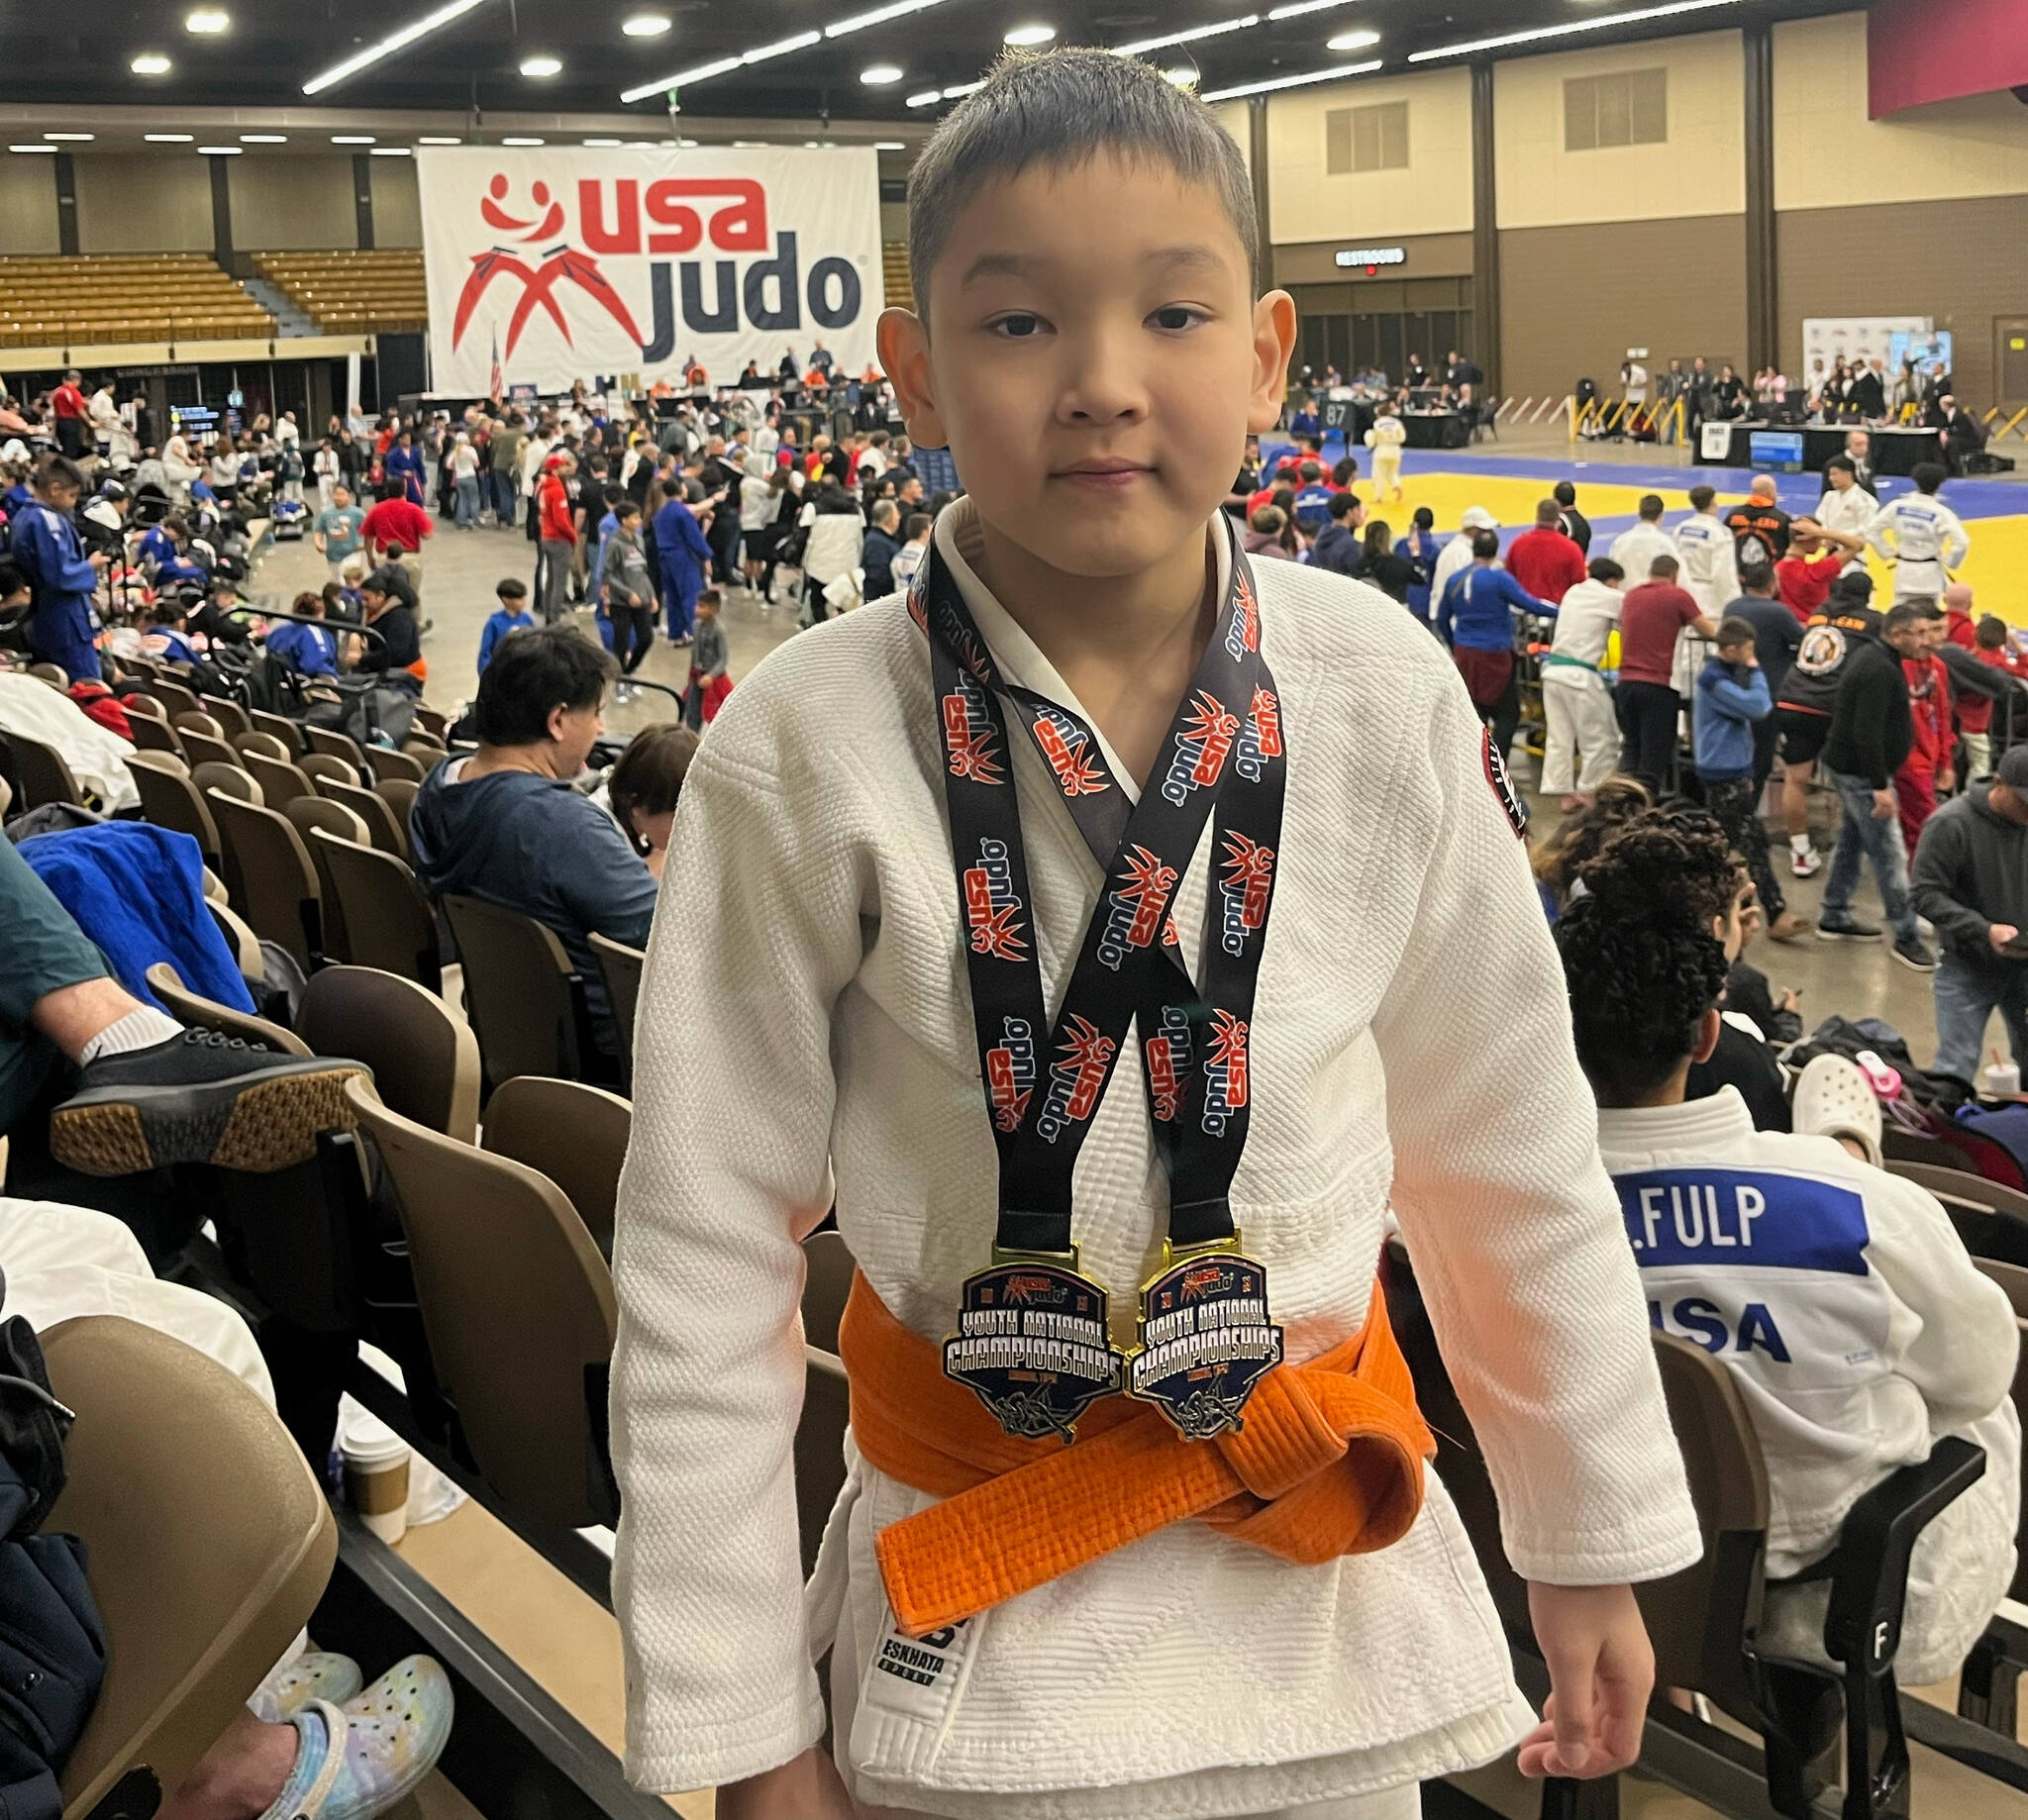 Northwood Elementary School student Mikhail Zulaev won a pair of titles at the USA JUDO Youth National Championships from March 18-19 in Lubbock, Texas. Mikhail, who trains at the Washington Judo Academy, won the Bantam 4 male/under 30 kg and the Bantam 5 male/under 29 kg divisions. Islander Jayne Loo of the Budokan Judo Dojo-Japanese Cultural & Community Center of Washington placed first in the IJF junior female/under 48 kg division. She was a 2022 Junior World Team member and 2022 Junior Olympic bronze medalist. Courtesy photo